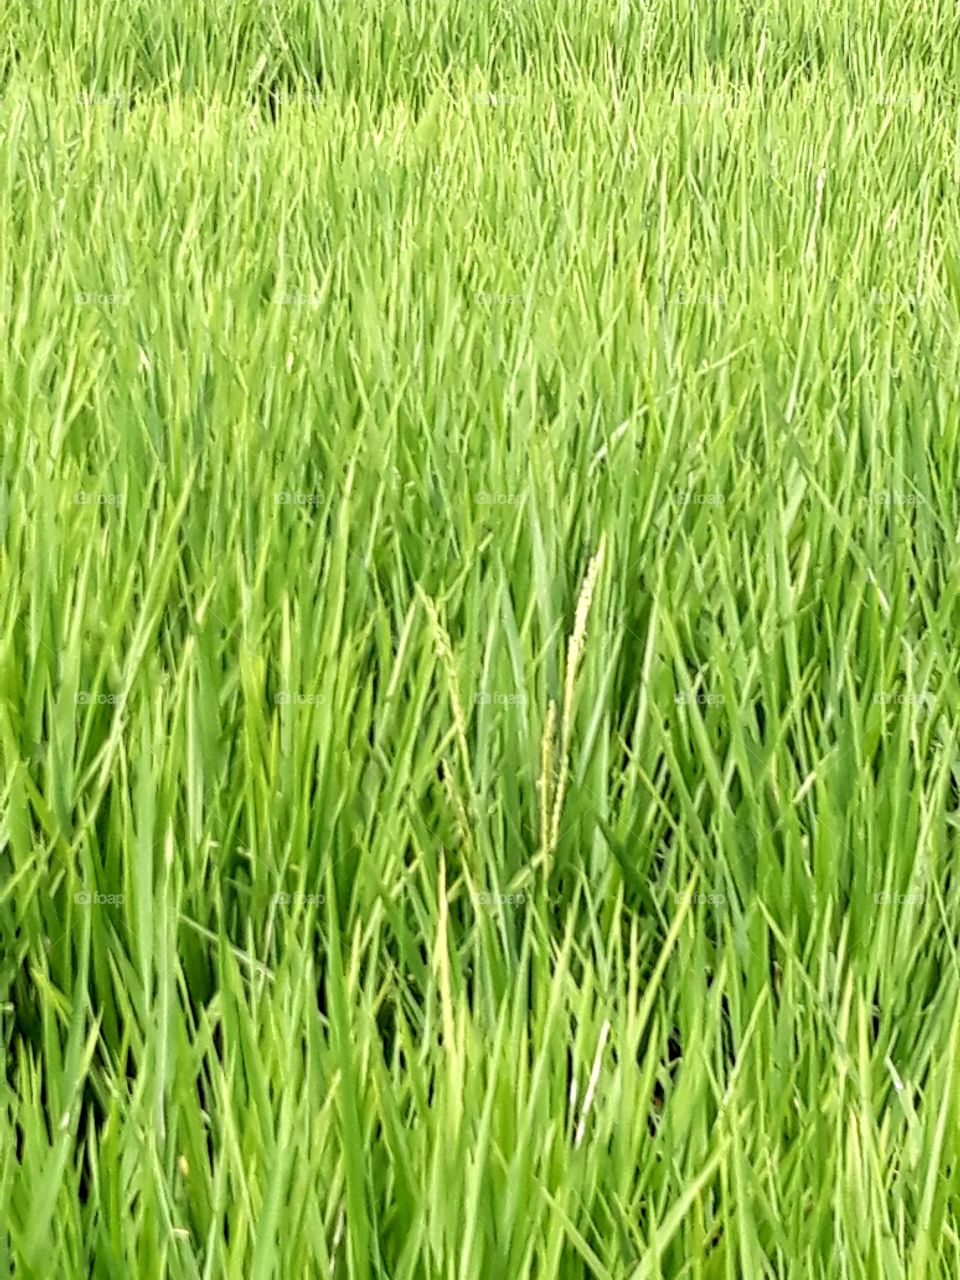 Rice plant on its flowering stage. One more month until harvest time.